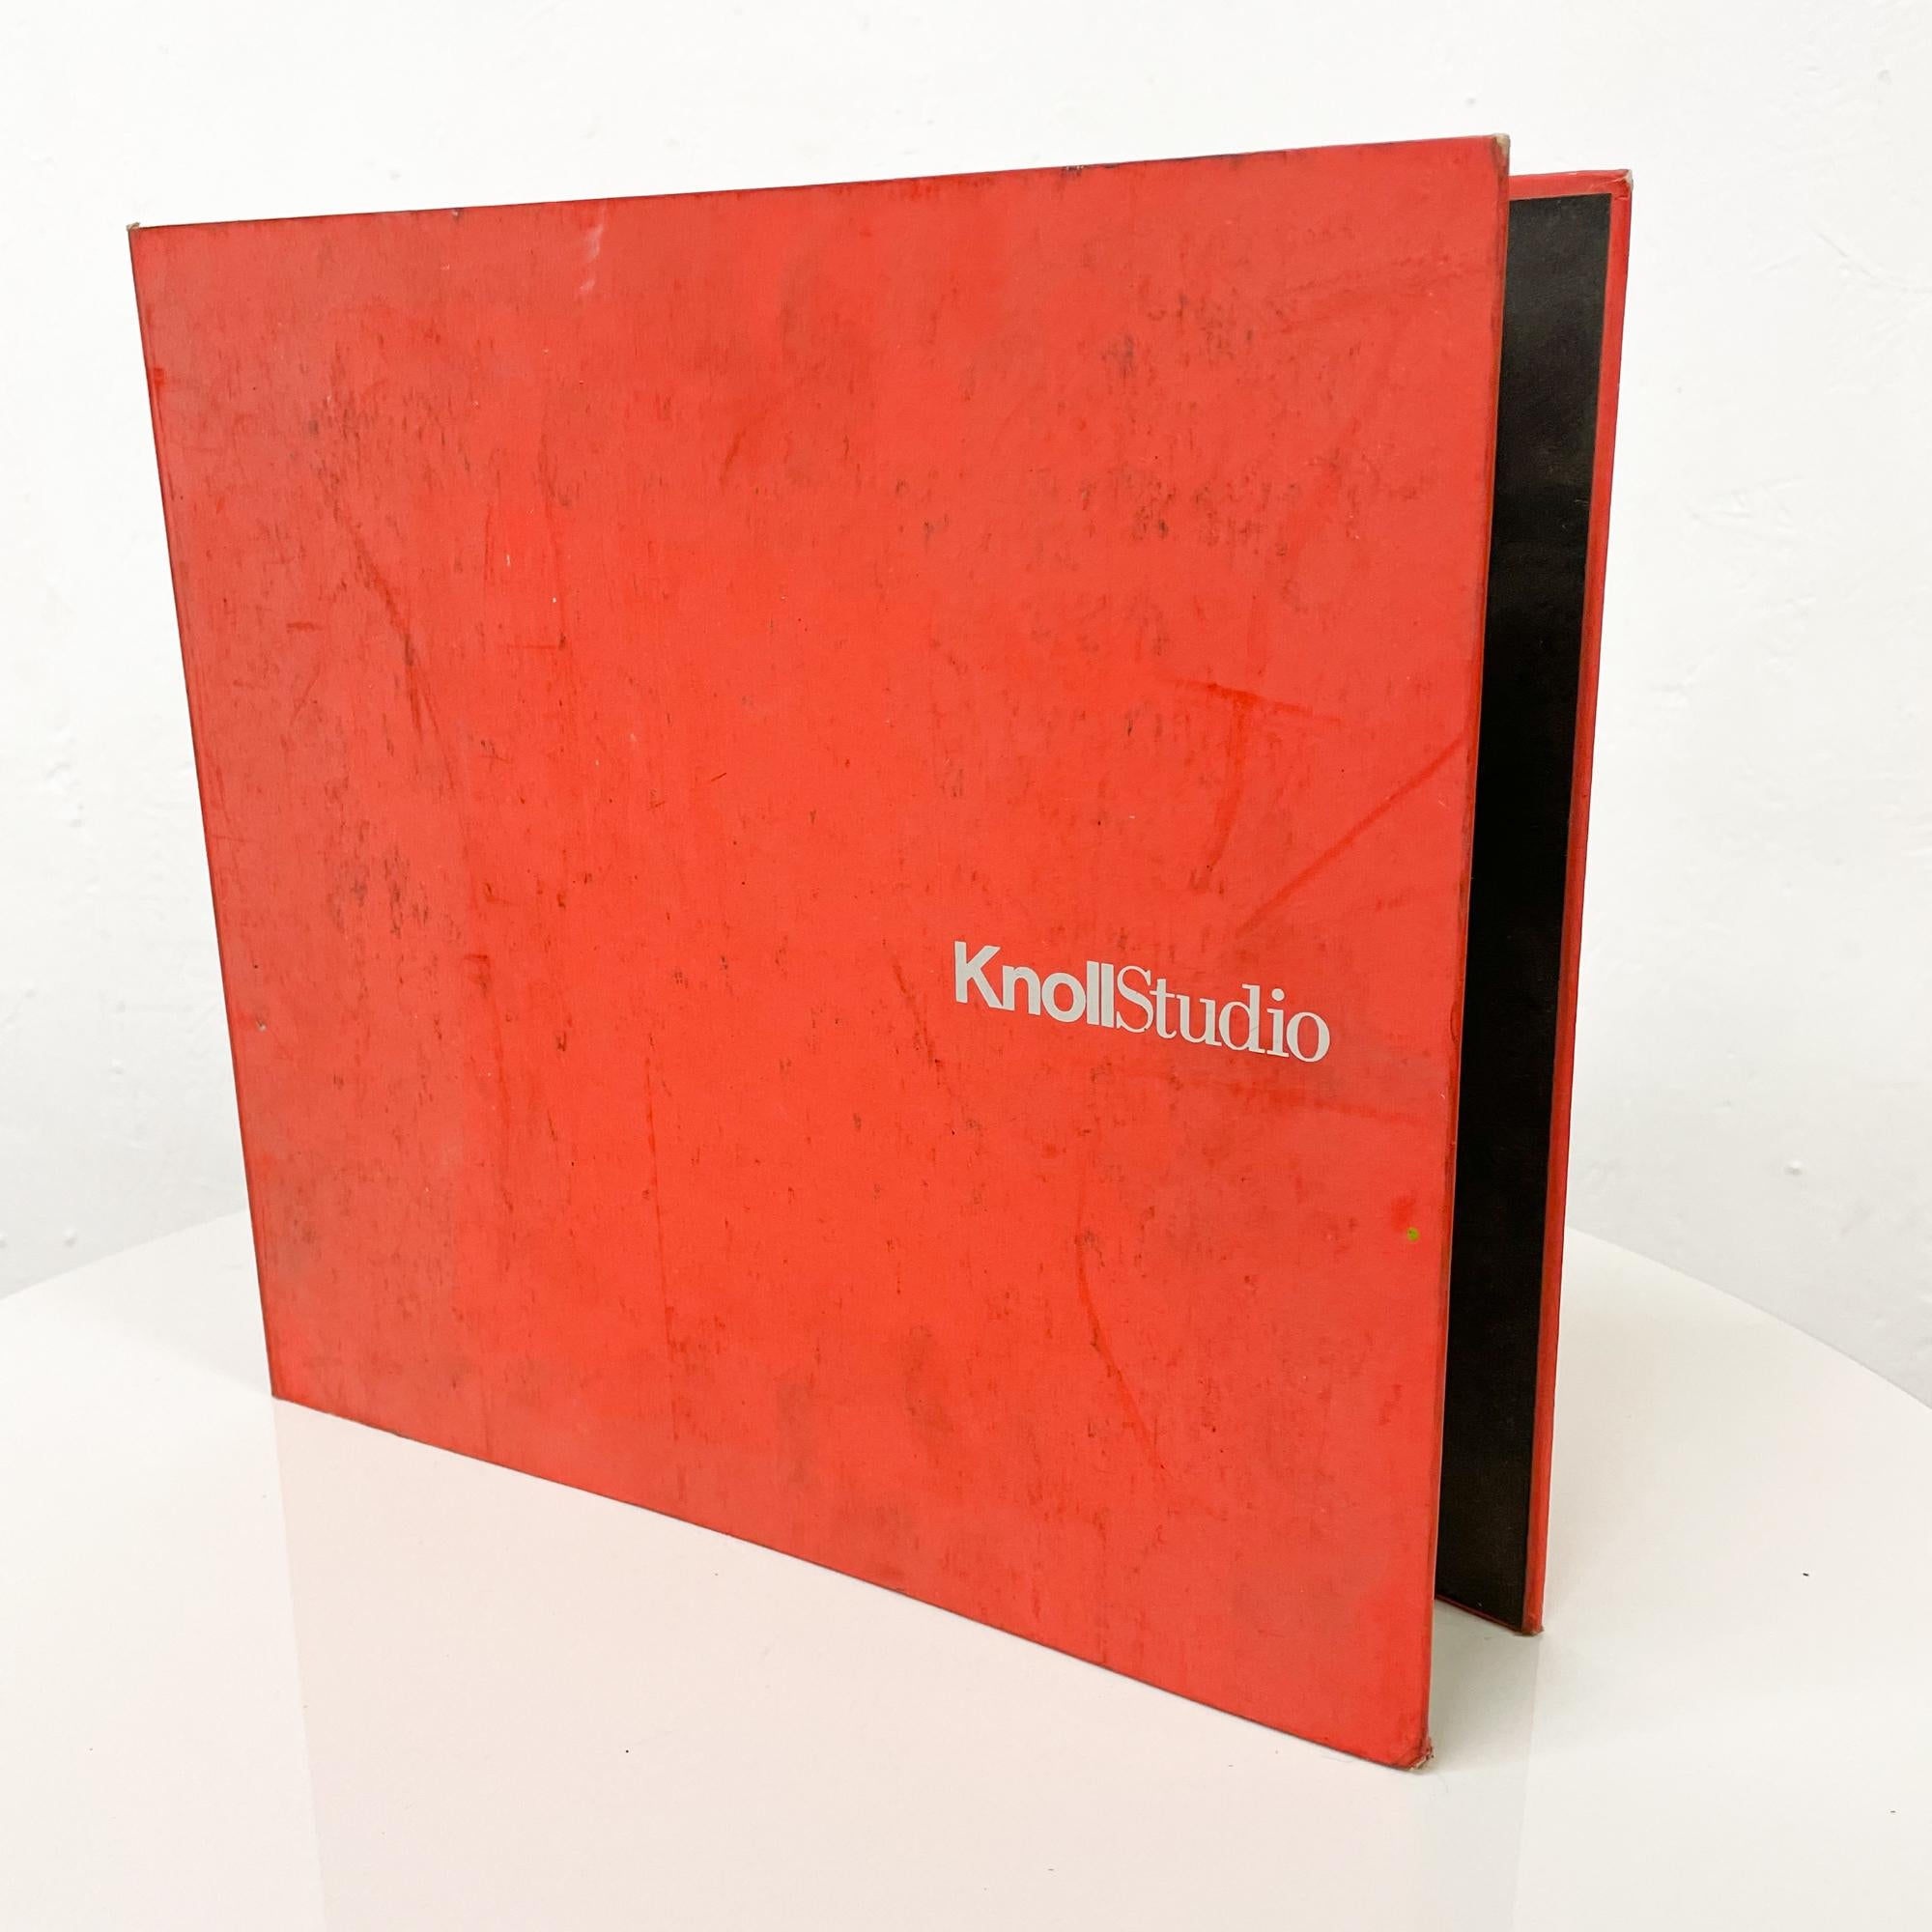 Knoll Catalog
Research Resource Knoll Studio Catalog, 2004. 
Hardback Red cover with large Knoll logo.
Many pictures of classic mid-century pieces and newer products with specs.
Gently used, expect signs of vintage wear.
Dimensions: 11.63